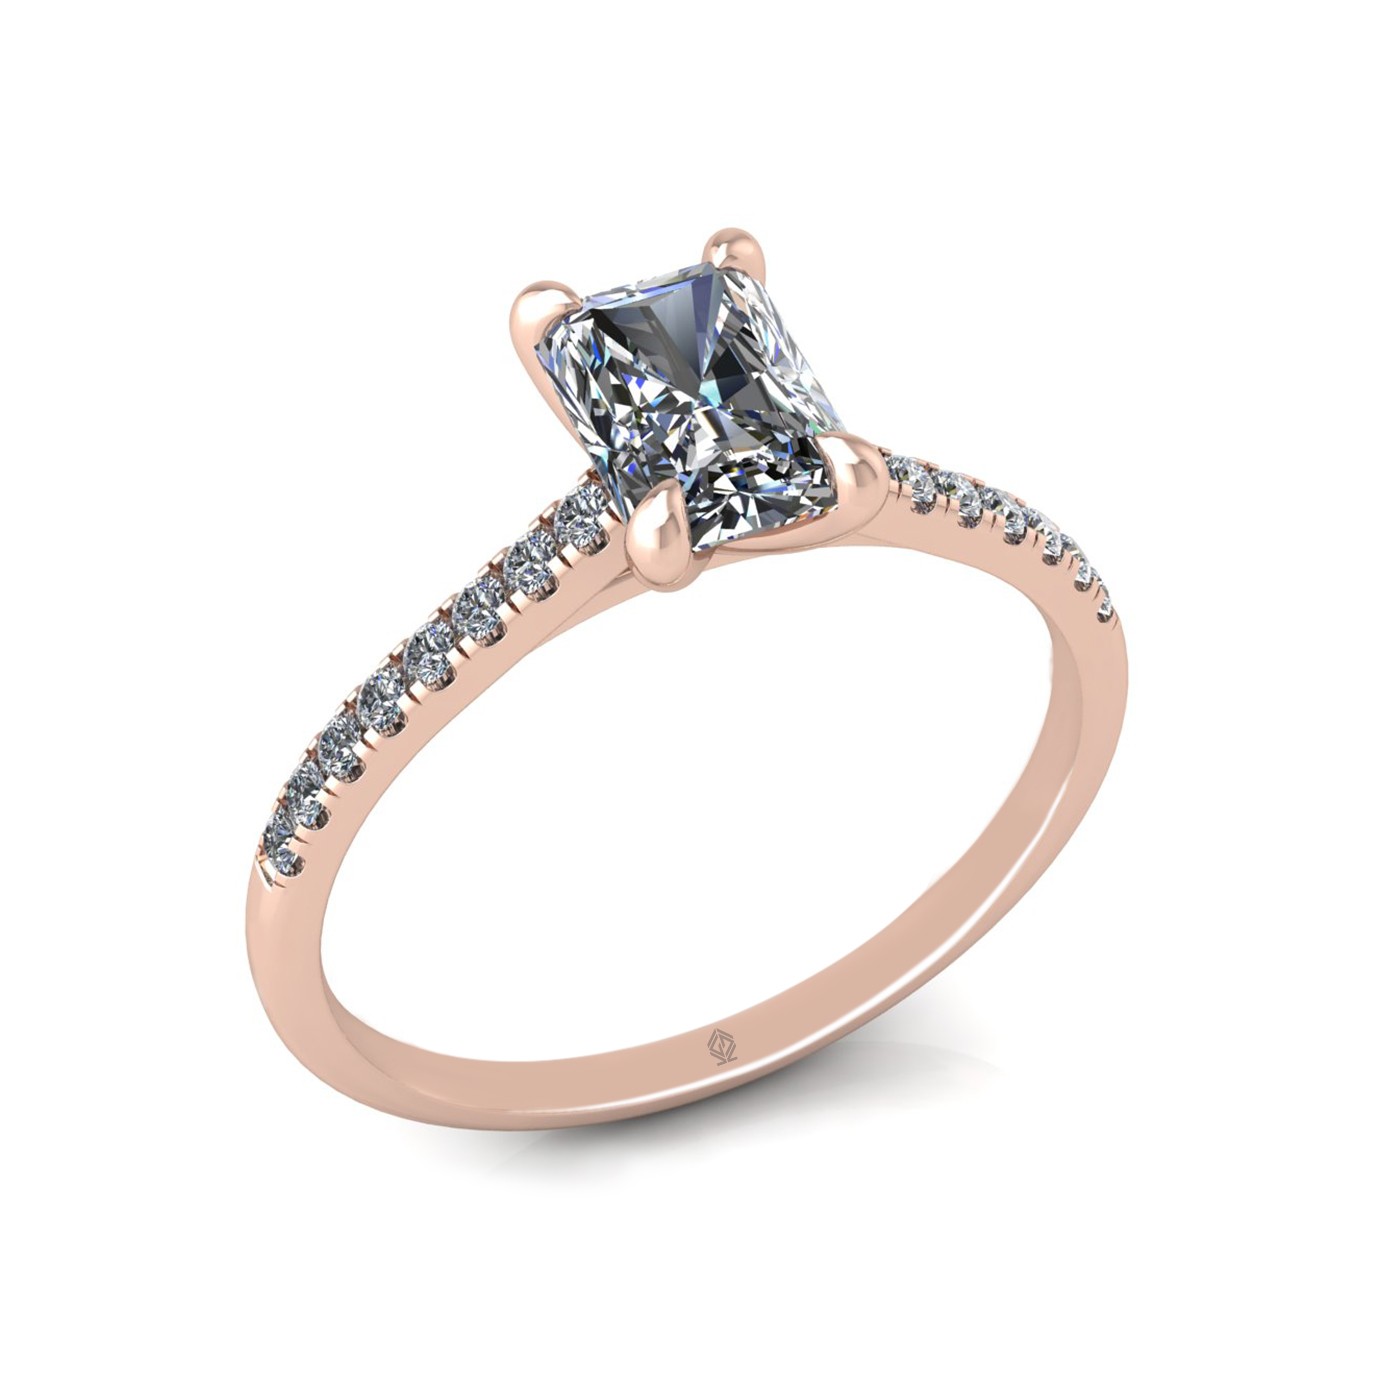 18k rose gold  1,00 ct 4 prongs radiant cut diamond engagement ring with whisper thin pavÉ set band